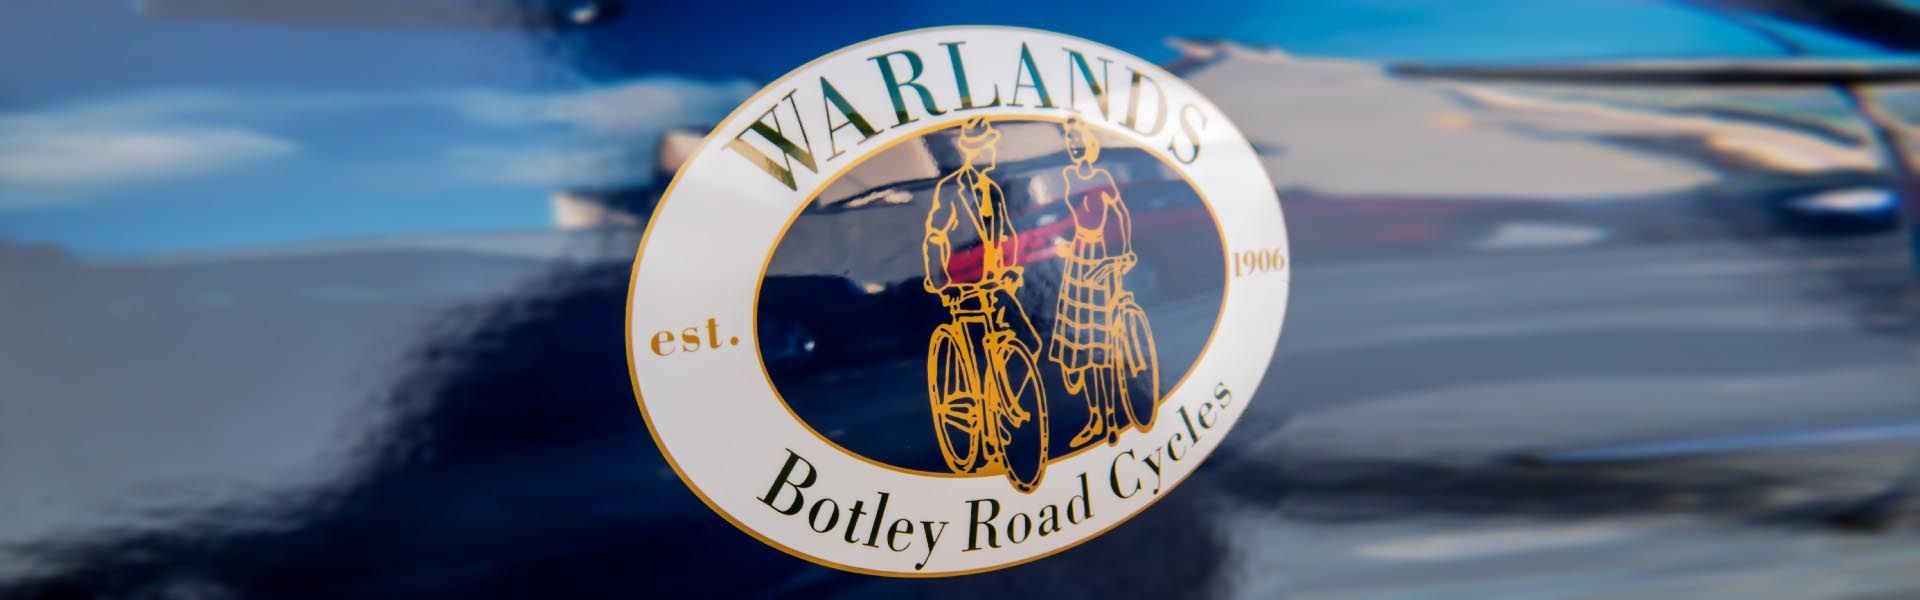 a vinyl vehicle logo on the side of a car that says warlands botley road cycles